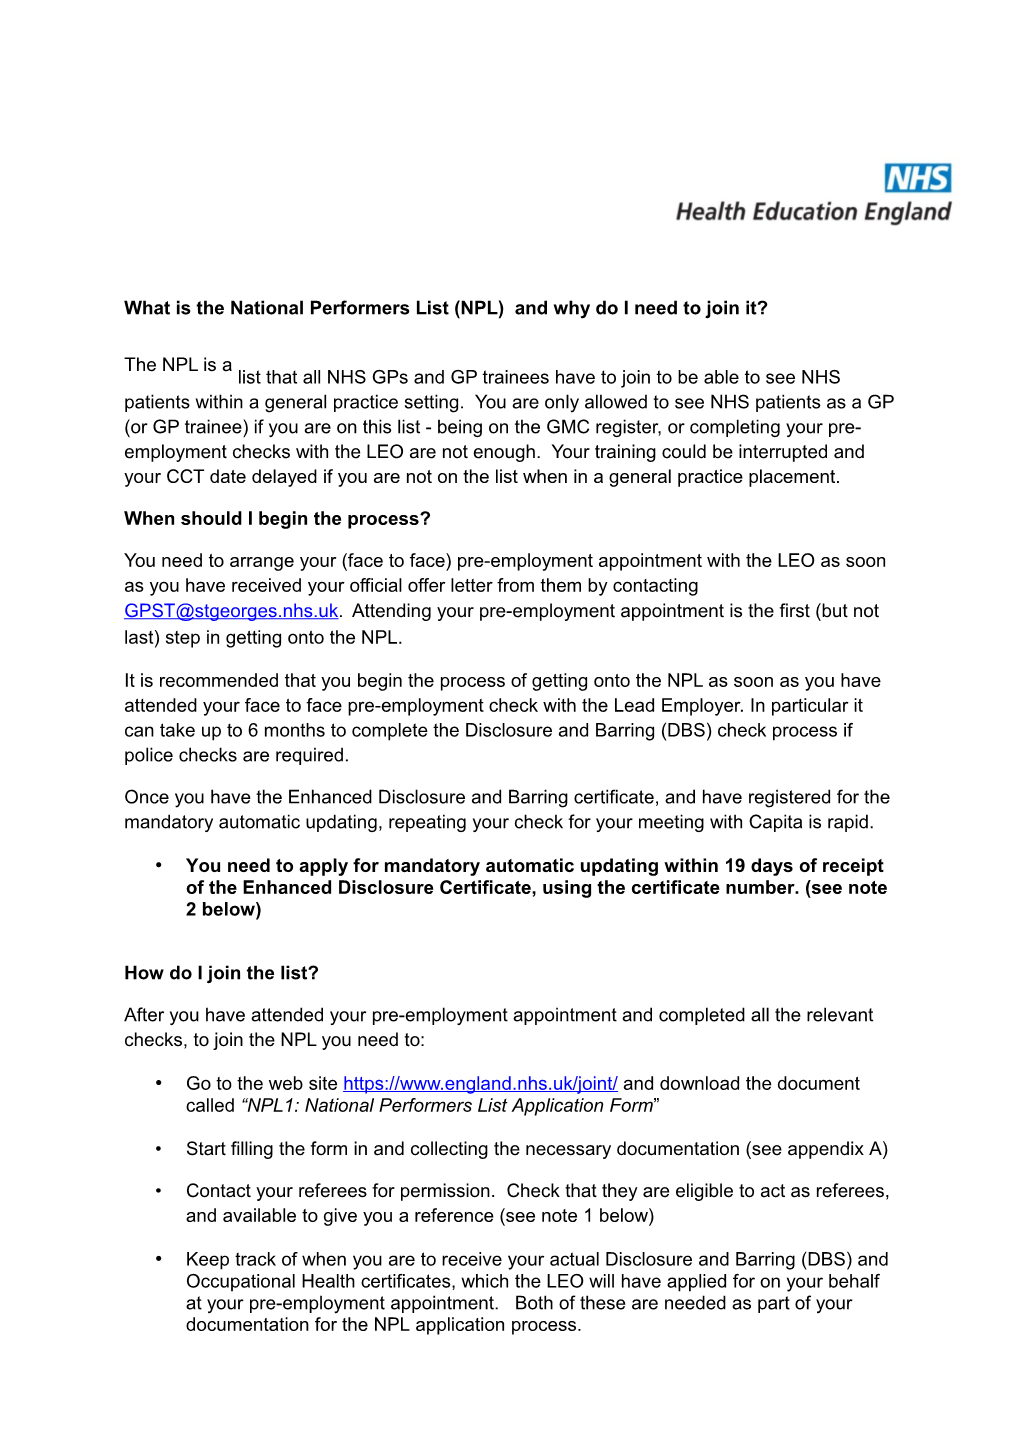 Requirements for the National Performers List (NPL)